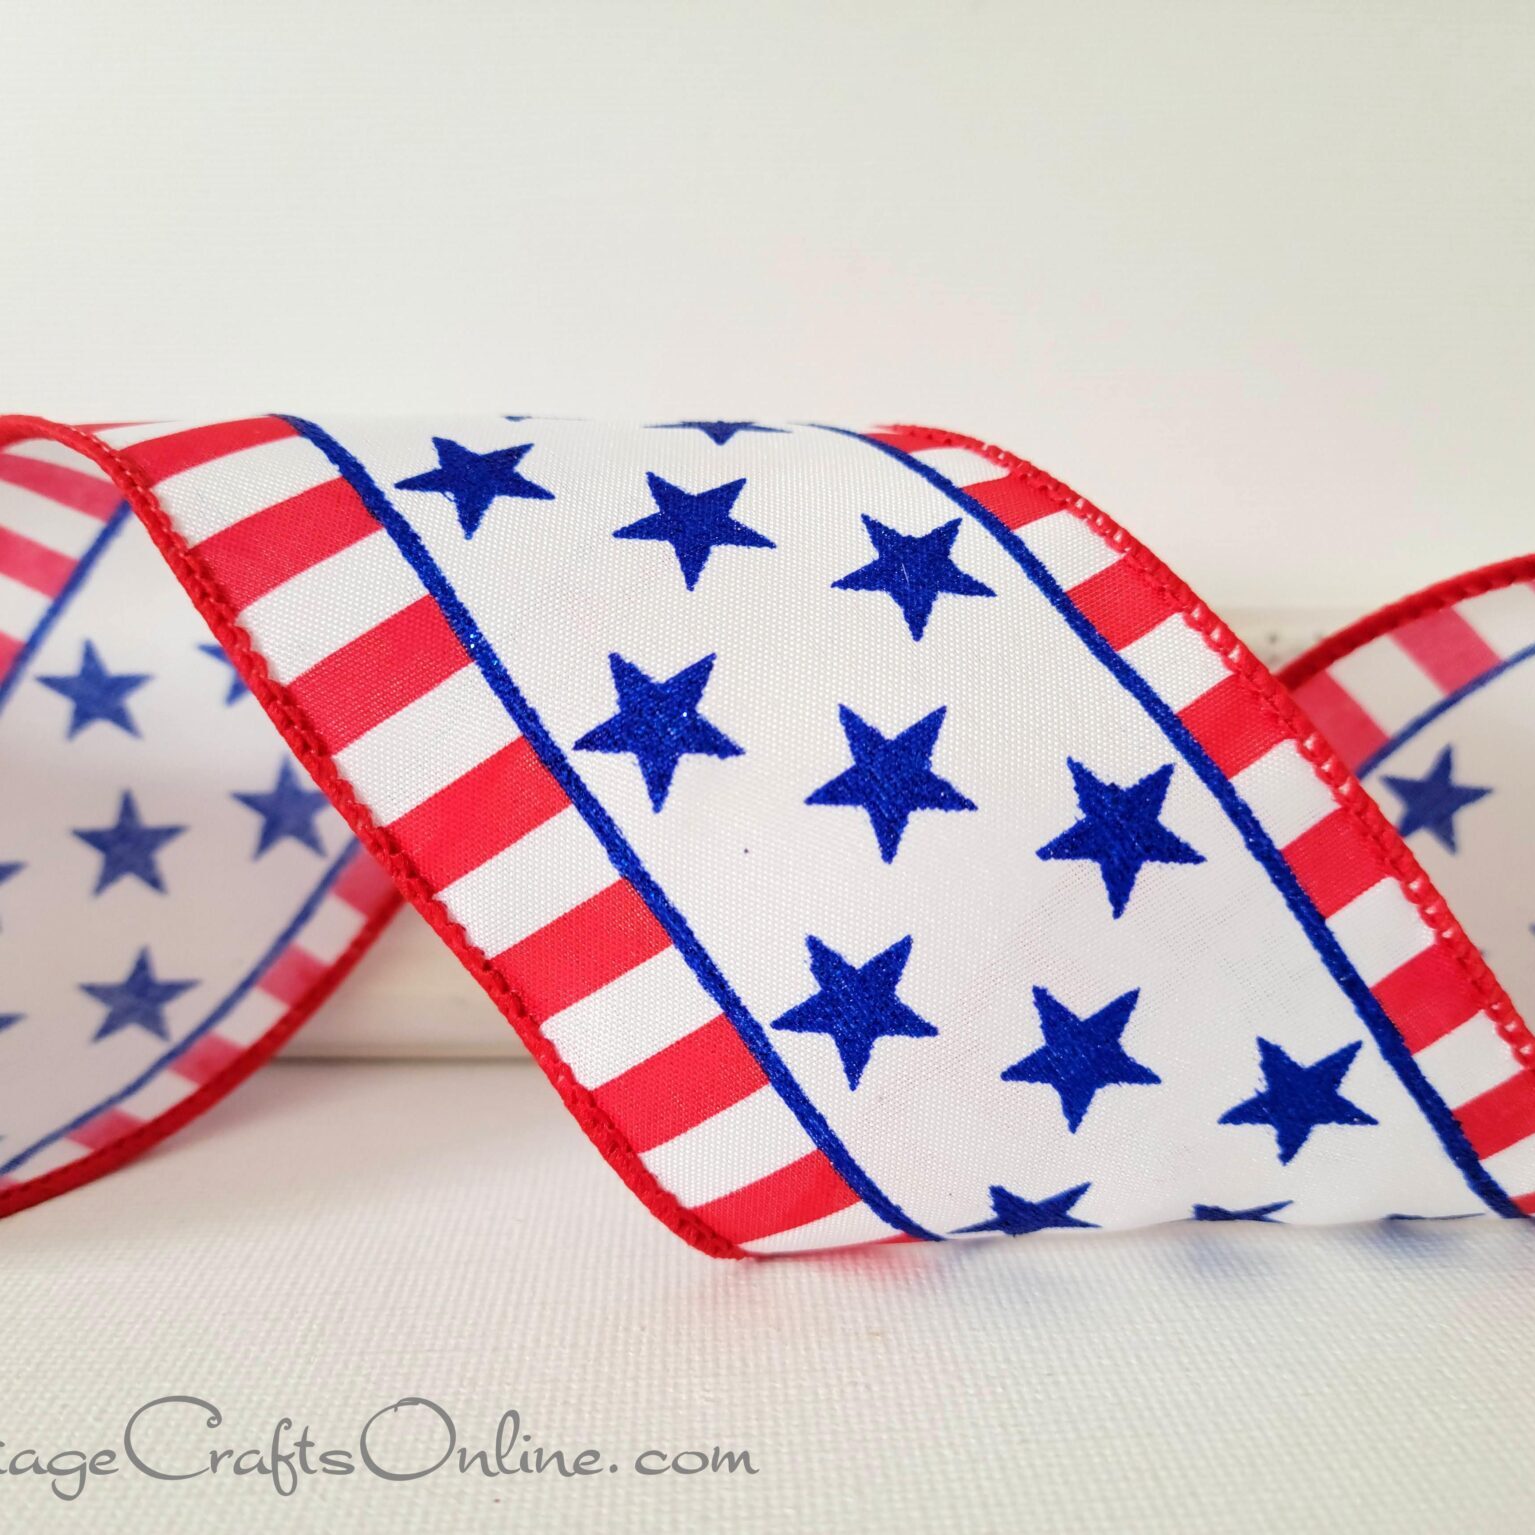 A red, white and blue ribbon with stars on it.